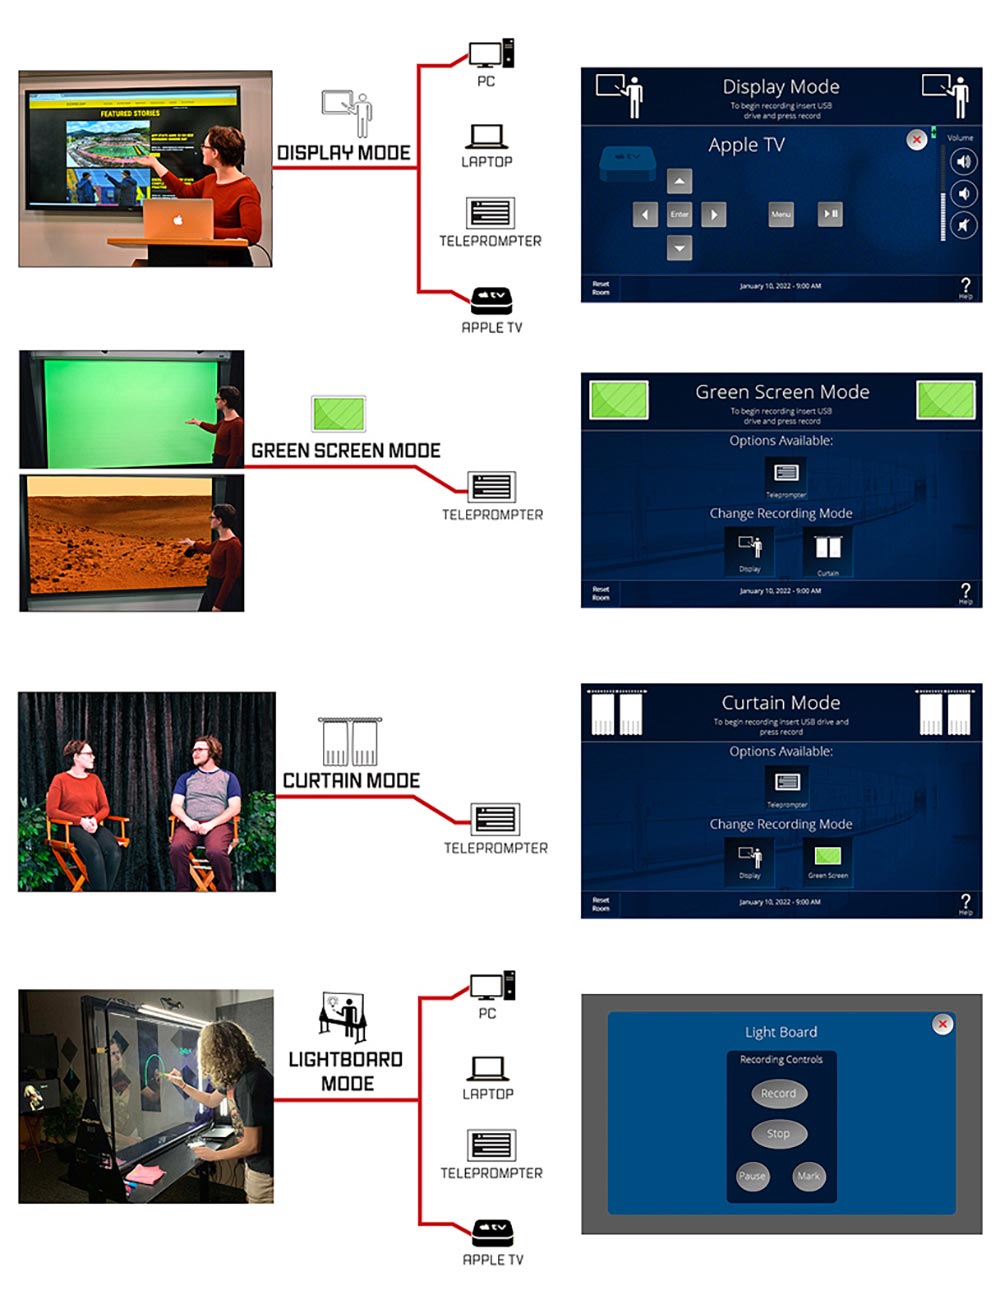 Four video recording modes can be easily set up from touchpanel user interfaces dedicated to each mode.